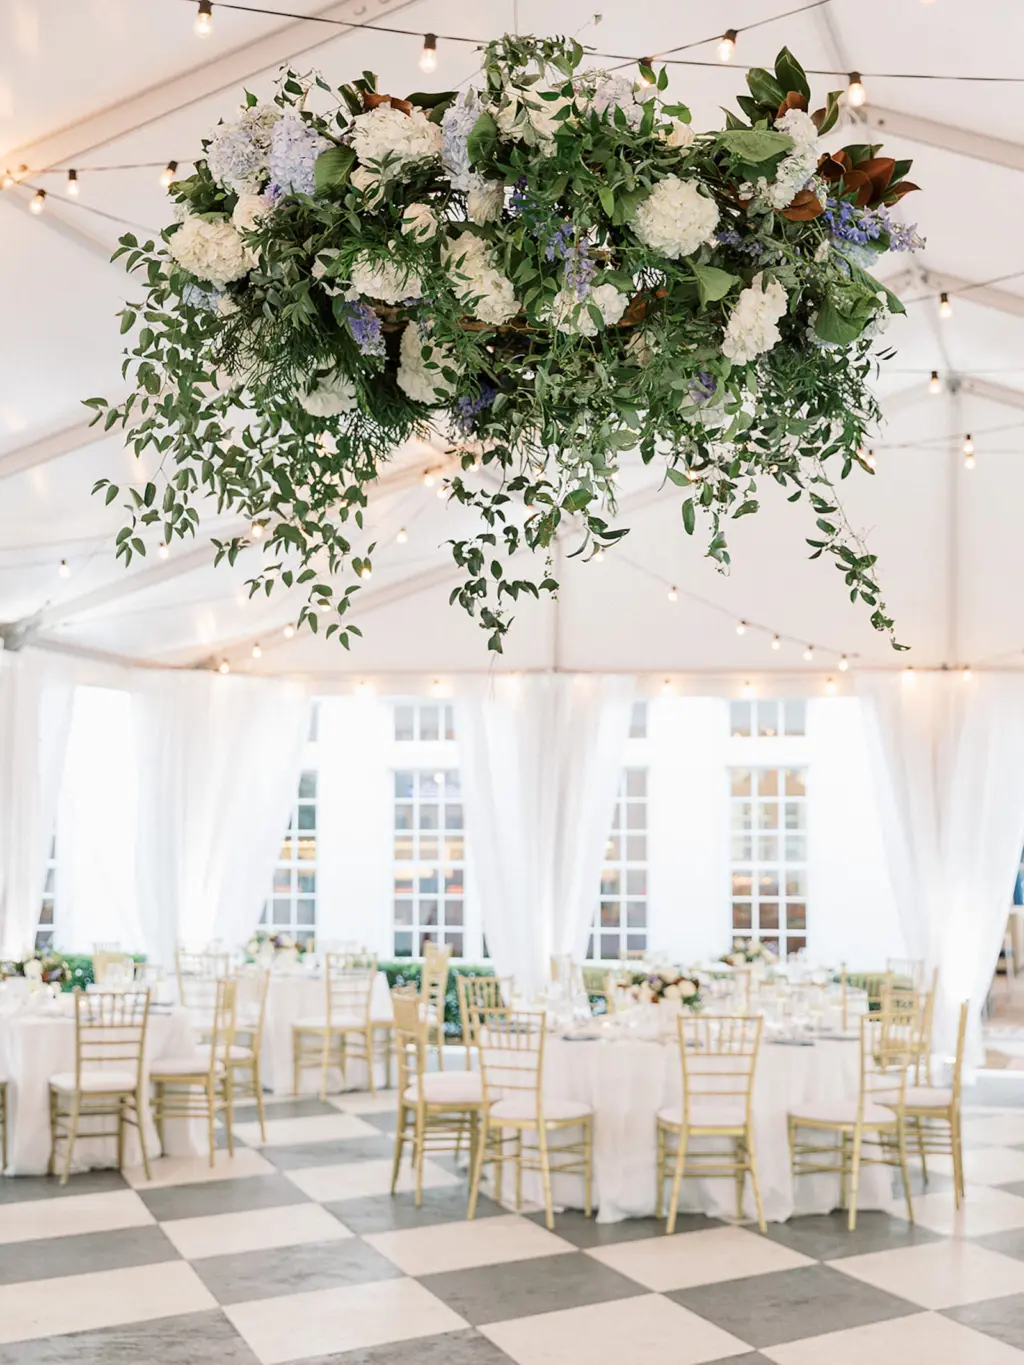 Hanging Floral Chandelier with Blue and White Hydrangeas and Greenery for Dance Floor | Tampa Bay Florida Save The Date Florida | Planner EventFull Weddings | Tampa Yacht and Country Club